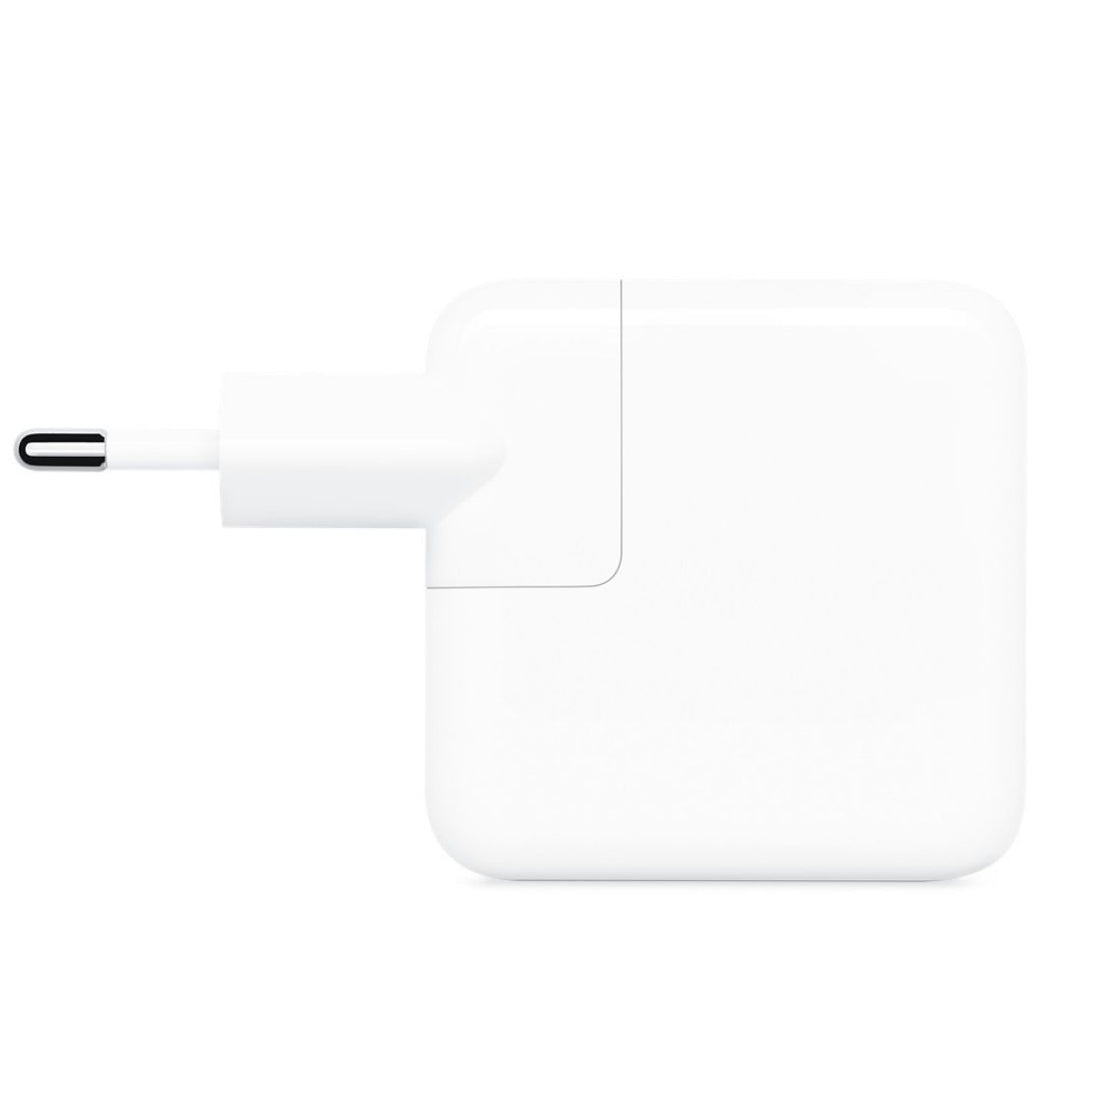 Apple 30W USB-C Power Adapter Charger for MacBook Air With Retina